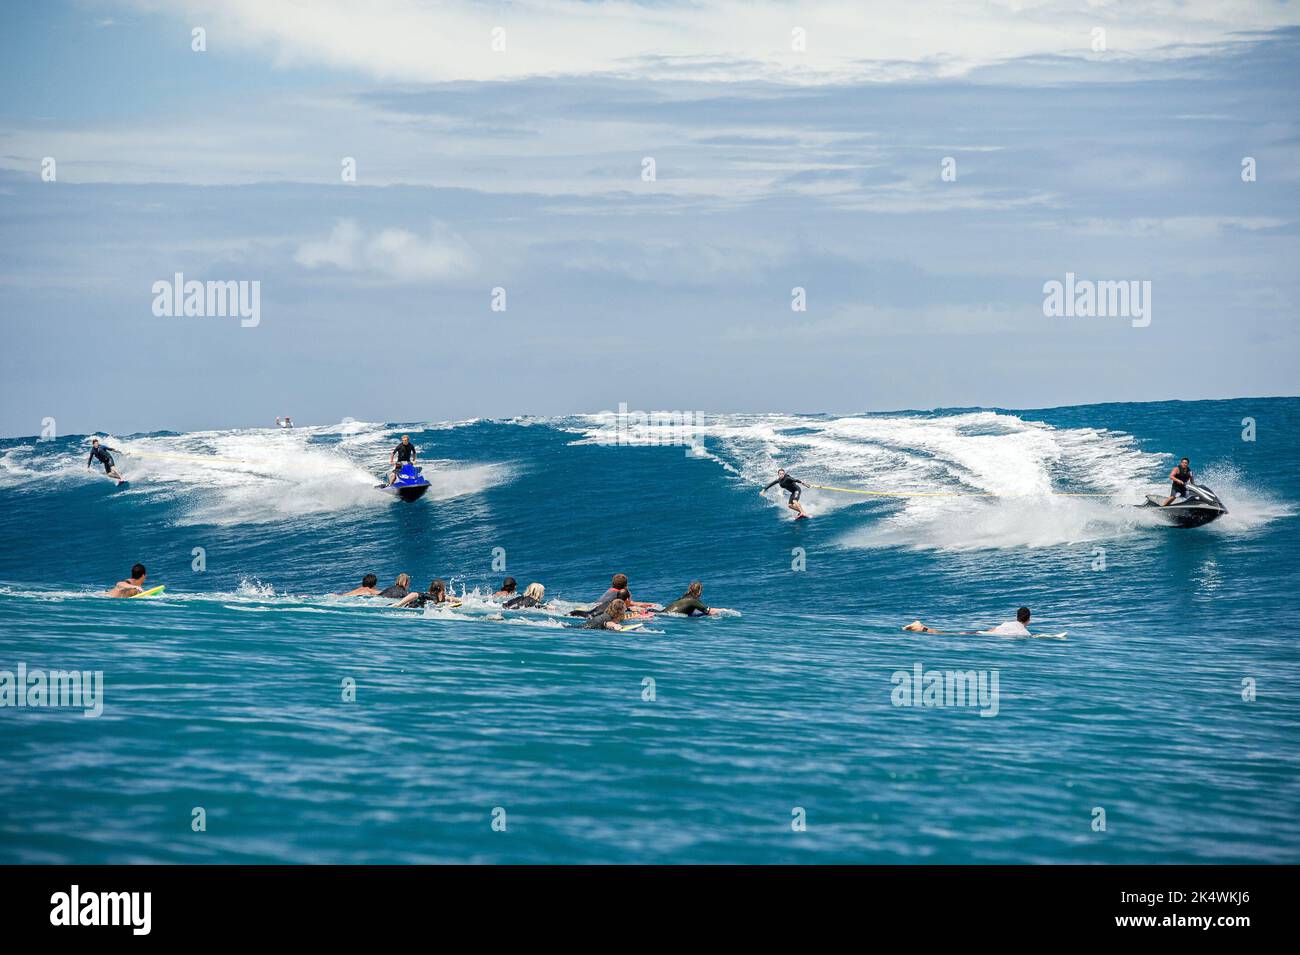 SURFING Hawaian surfers Bruce Iron towed in by Laird Hamilton and Billy Kemper towed in by Tahitian surfer Raimana Van Bastolaer at Teahupoo, during a big swell on September 11, 2014 at Teahupoo in Tahiti, French Polynesia - Photo: Julien Girardot/DPPI/LiveMedia Stock Photo